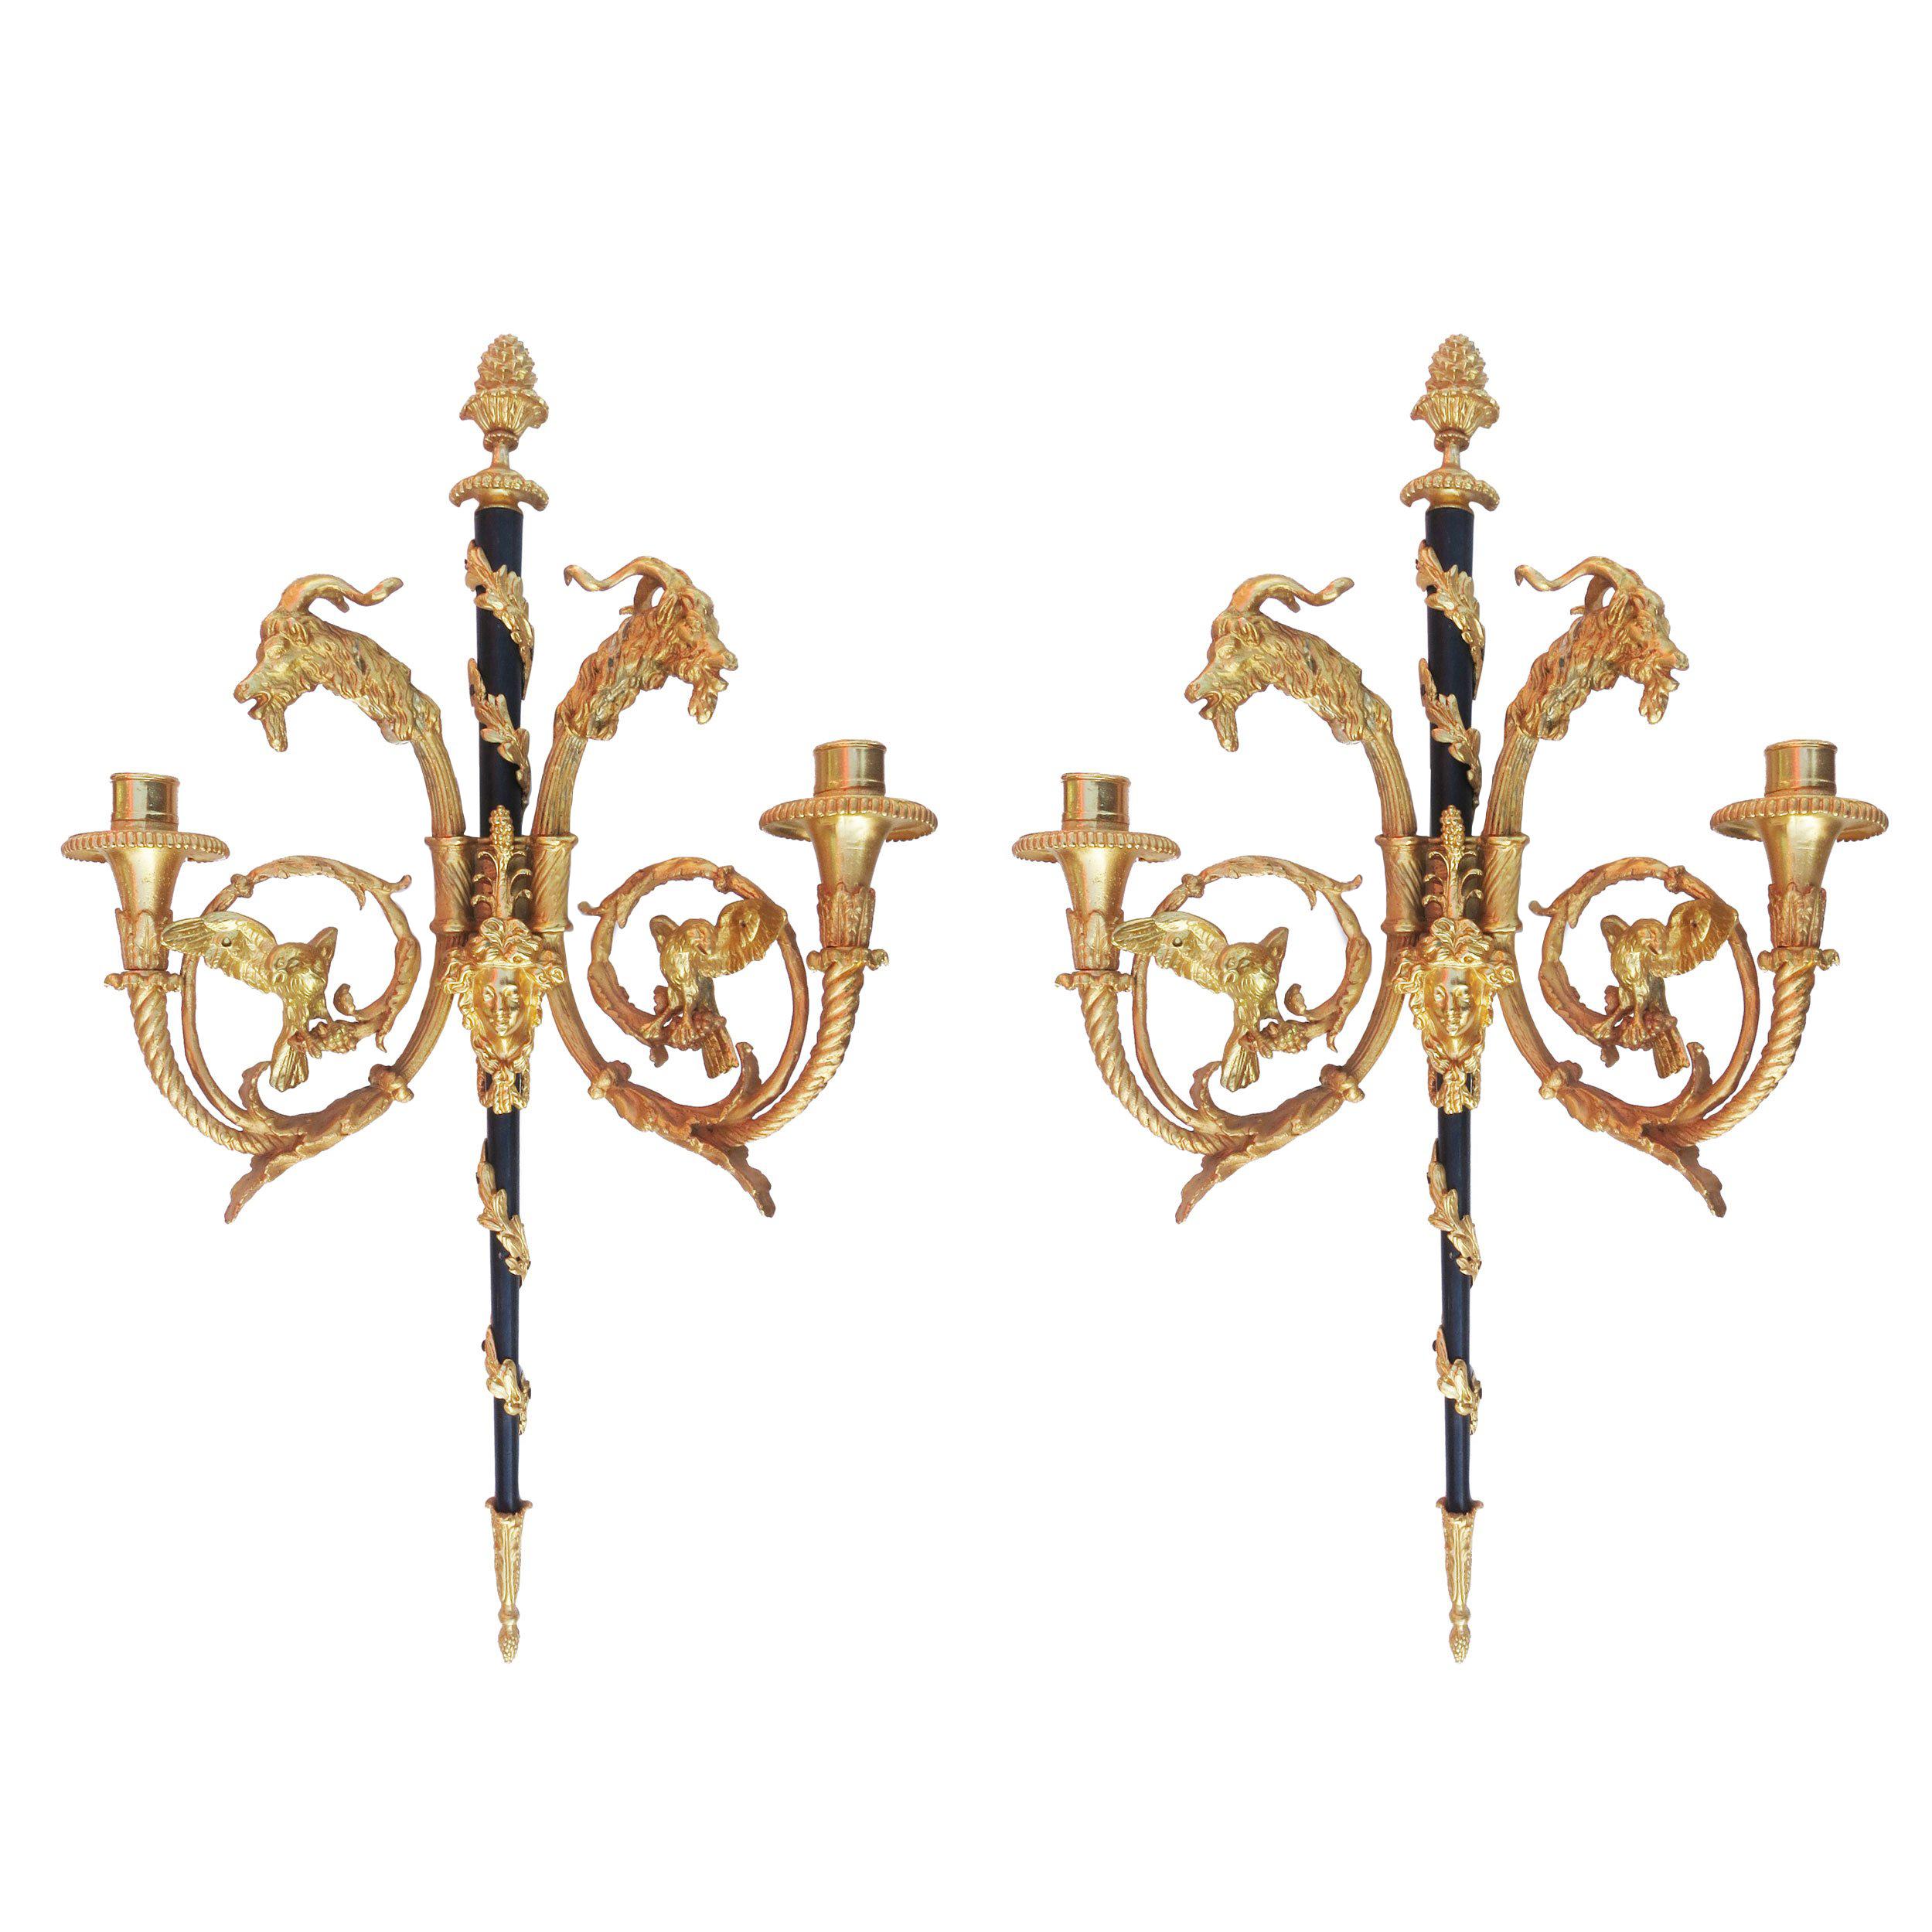 24-Karat Empire Style Candle Wall Sconces Pair w/ Goat Heads